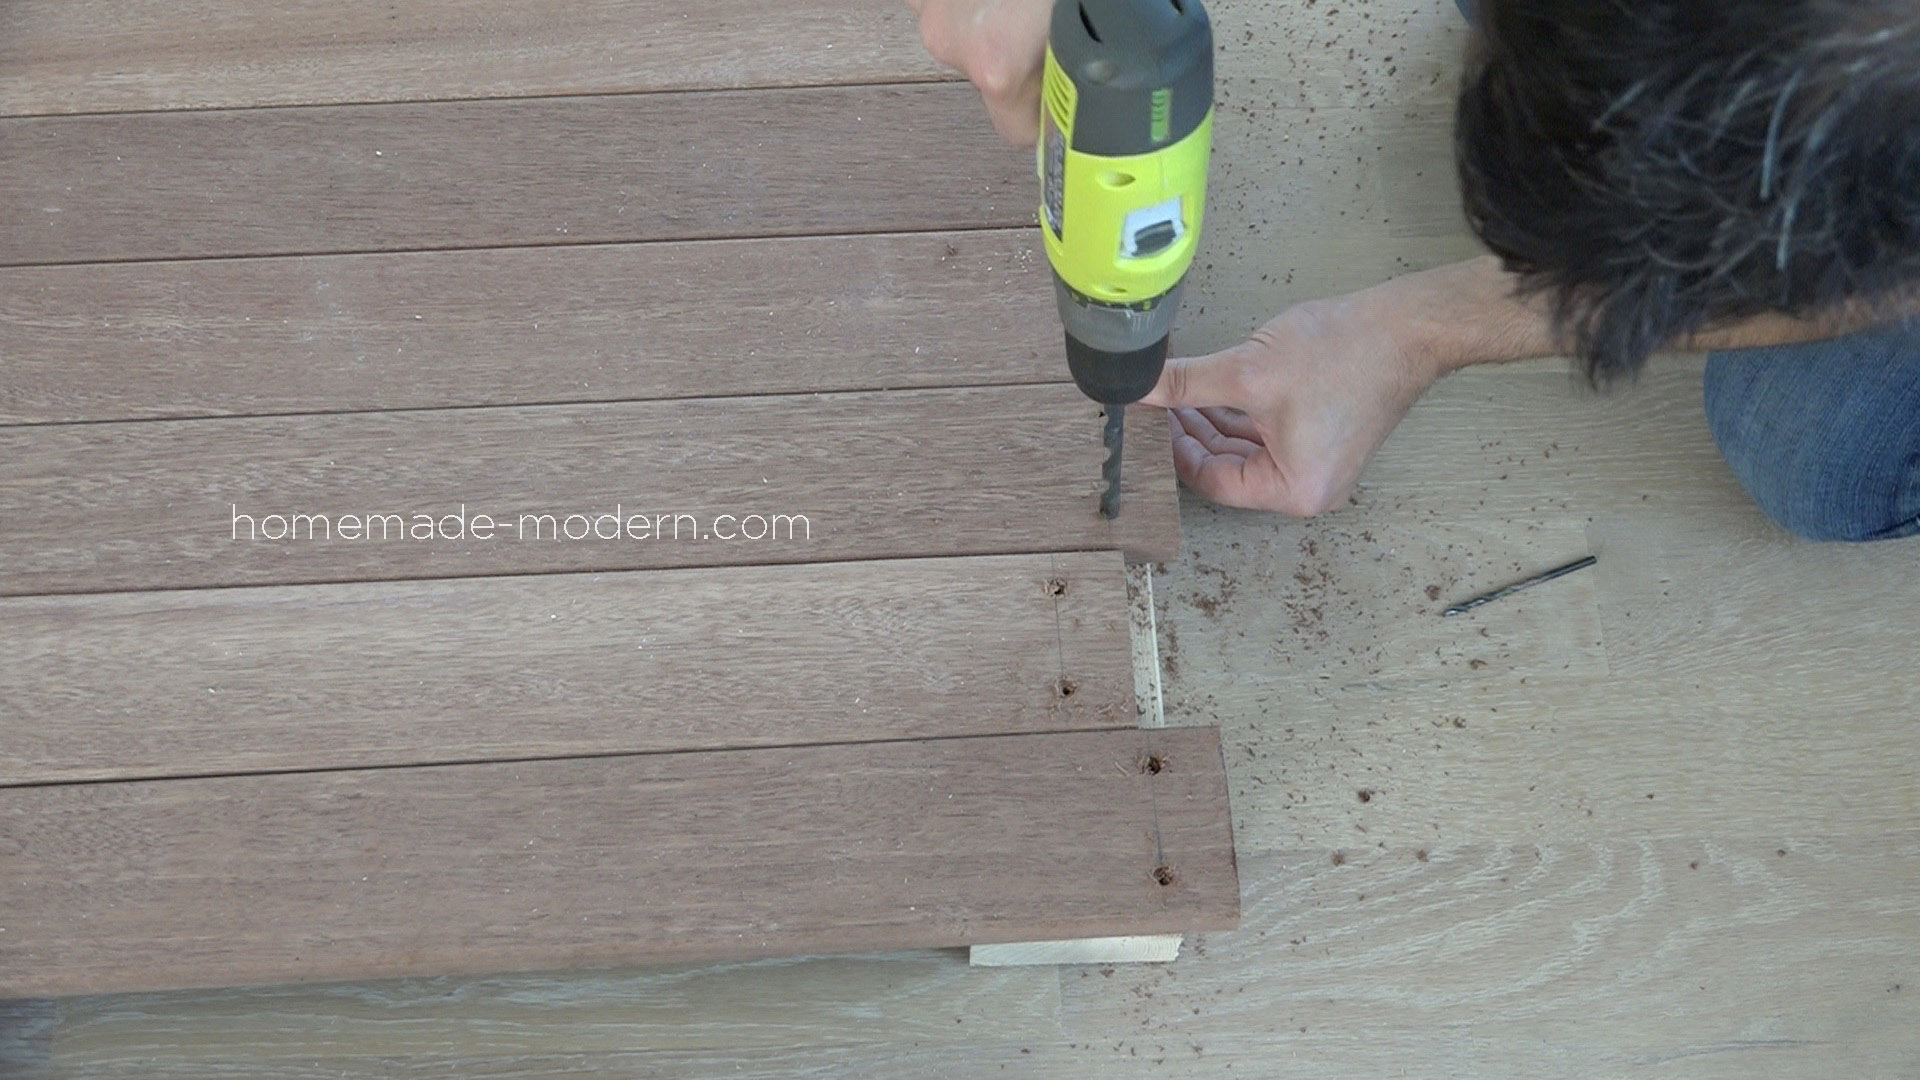 This DIY Outdoor Dining Table is made from painted 2x4s and hardwood deck boards. All the materials can be found at Home Depot. Full instructions can be found at HomeMade-Modern.com